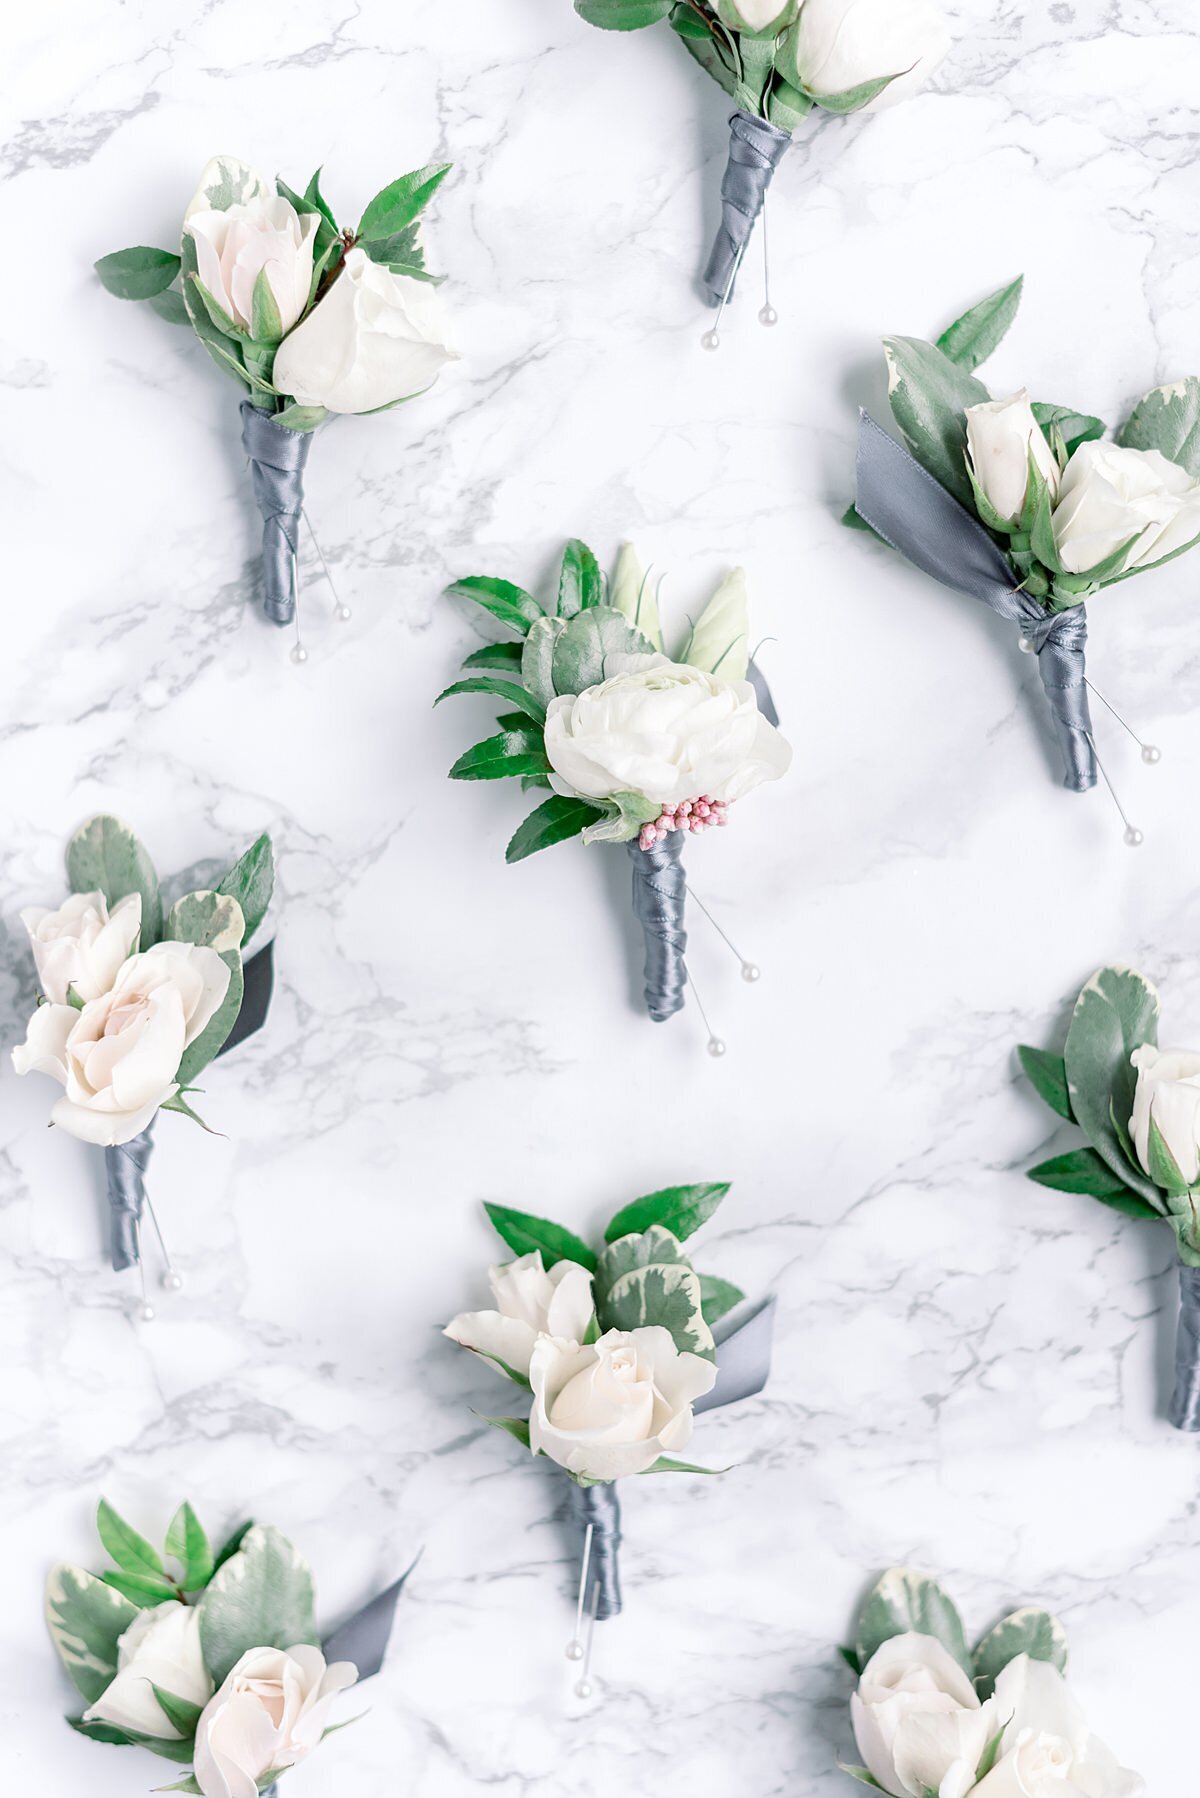 White gardenia boutonnieres with greenery leaves wrapped in silver gray satin ribbon.